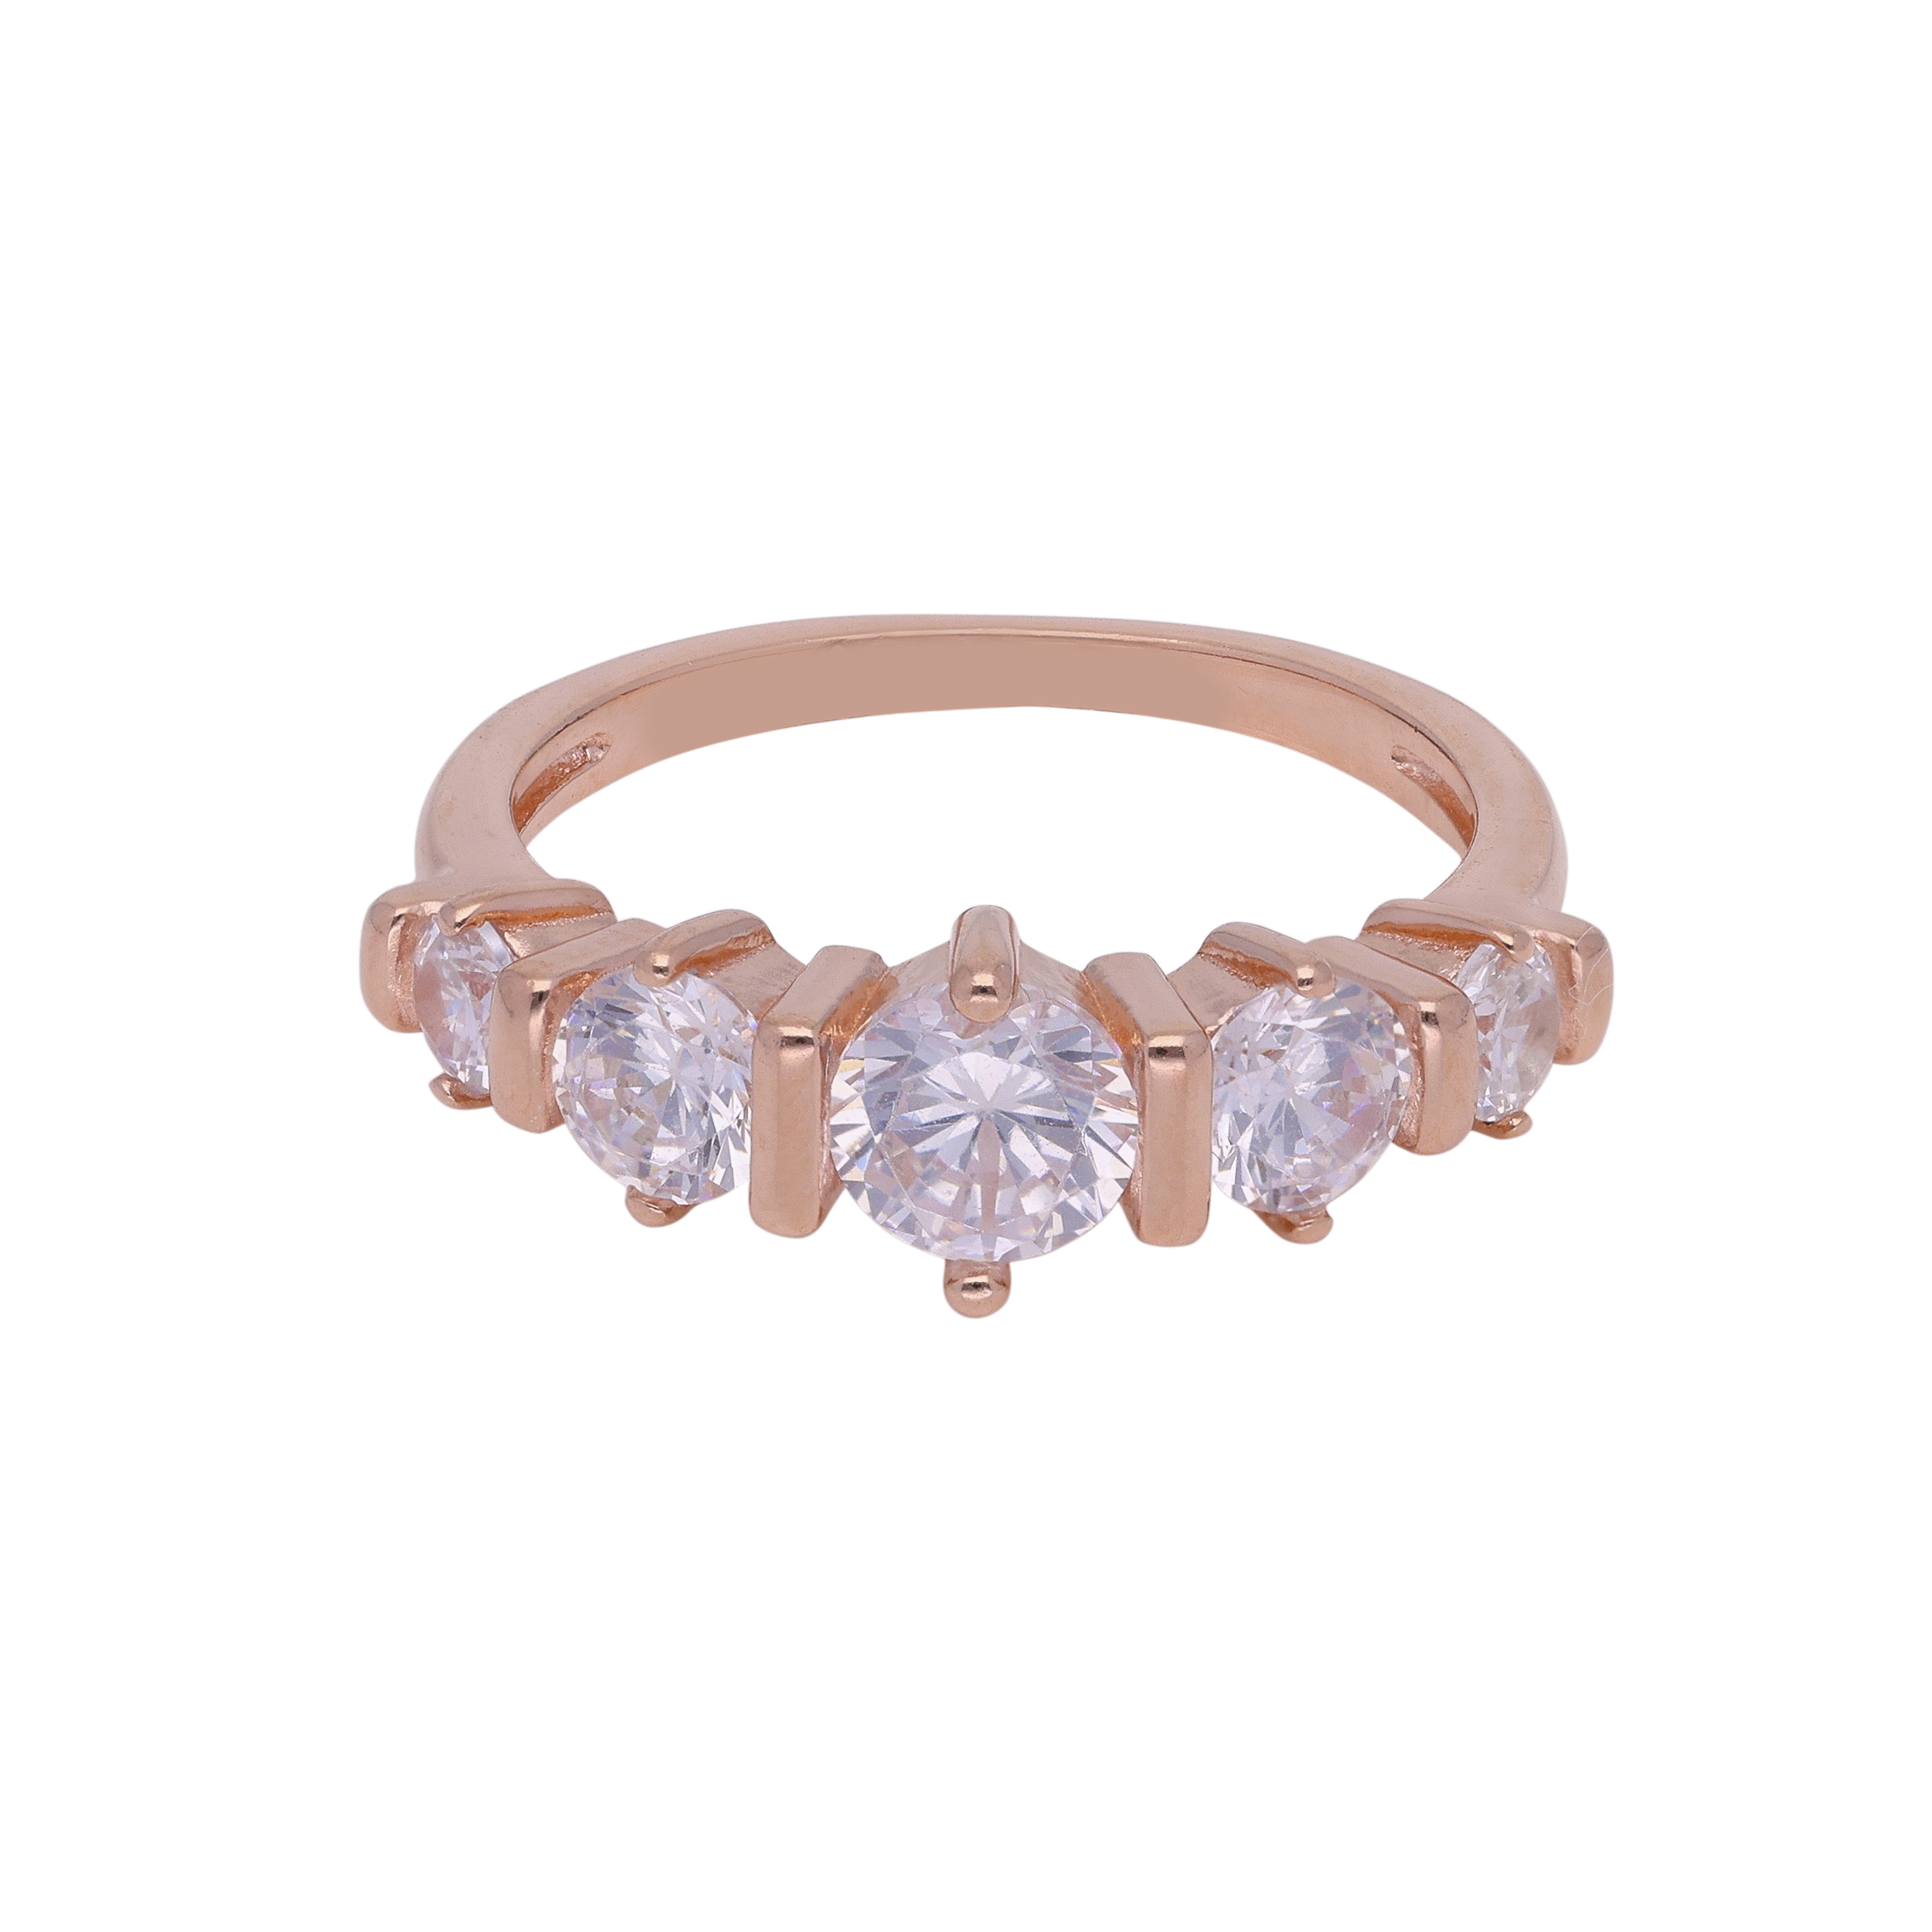 Elegance in Contrast: Sterling Silver Ring with Rose Gold Solitaire Setting | SKU : 0019891989, 0019891972